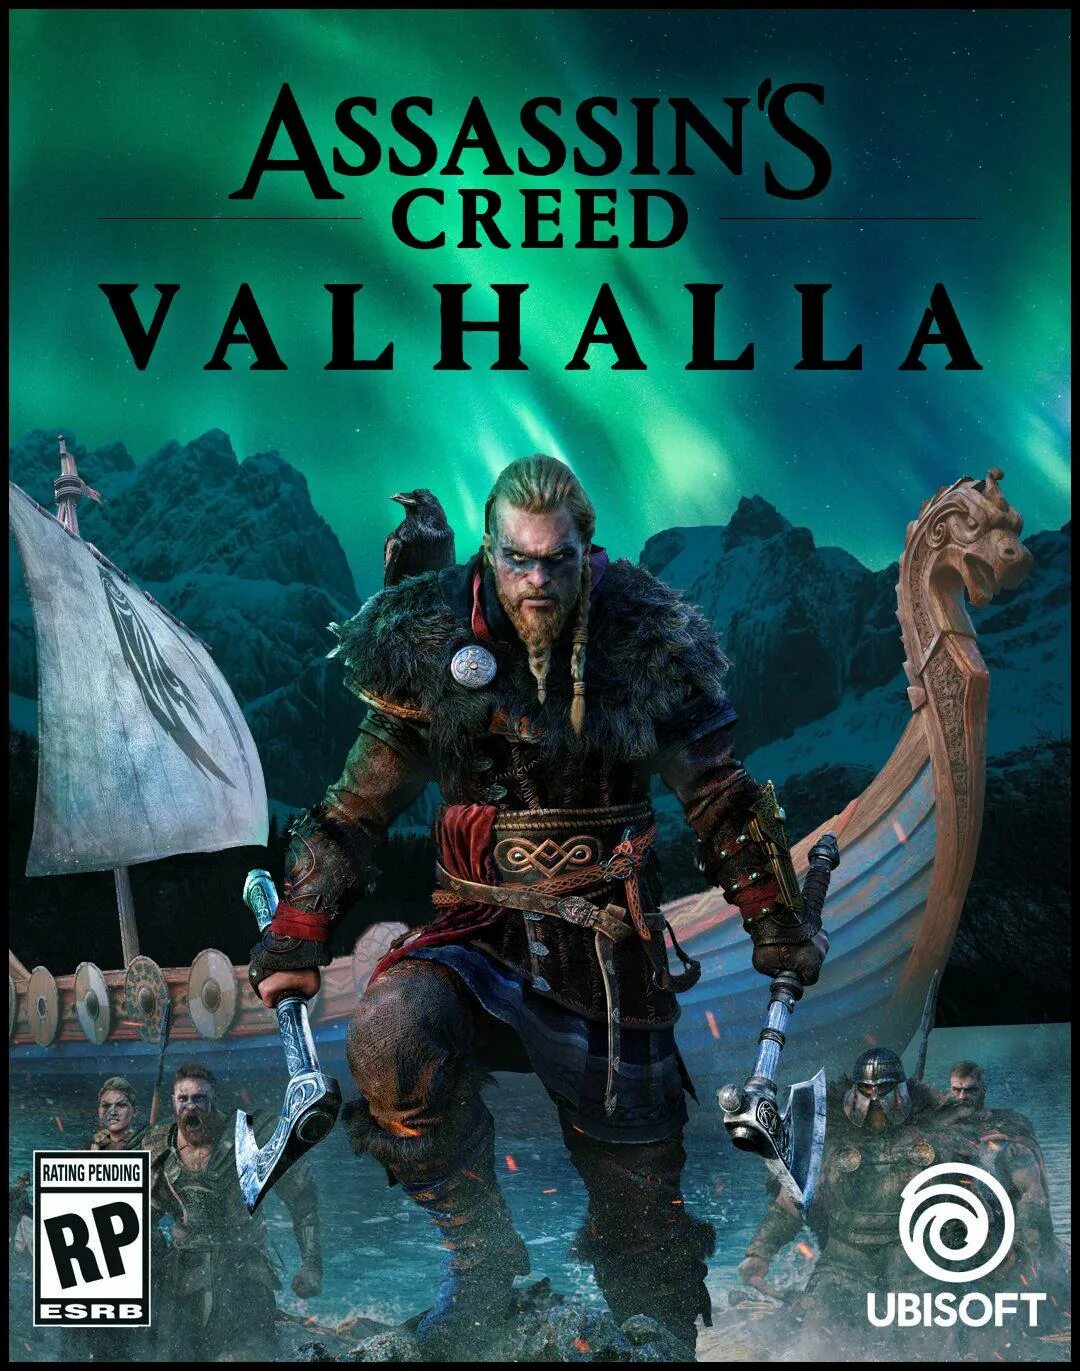 Assassin’s Creed Вальгалла. Assassin's Creed Valhalla ps4 & ps5. Ассасин Крид Вальхалла пс4. Assassin's Creed Valhalla ps4 обложка. Ассасин вальхалла от механиков